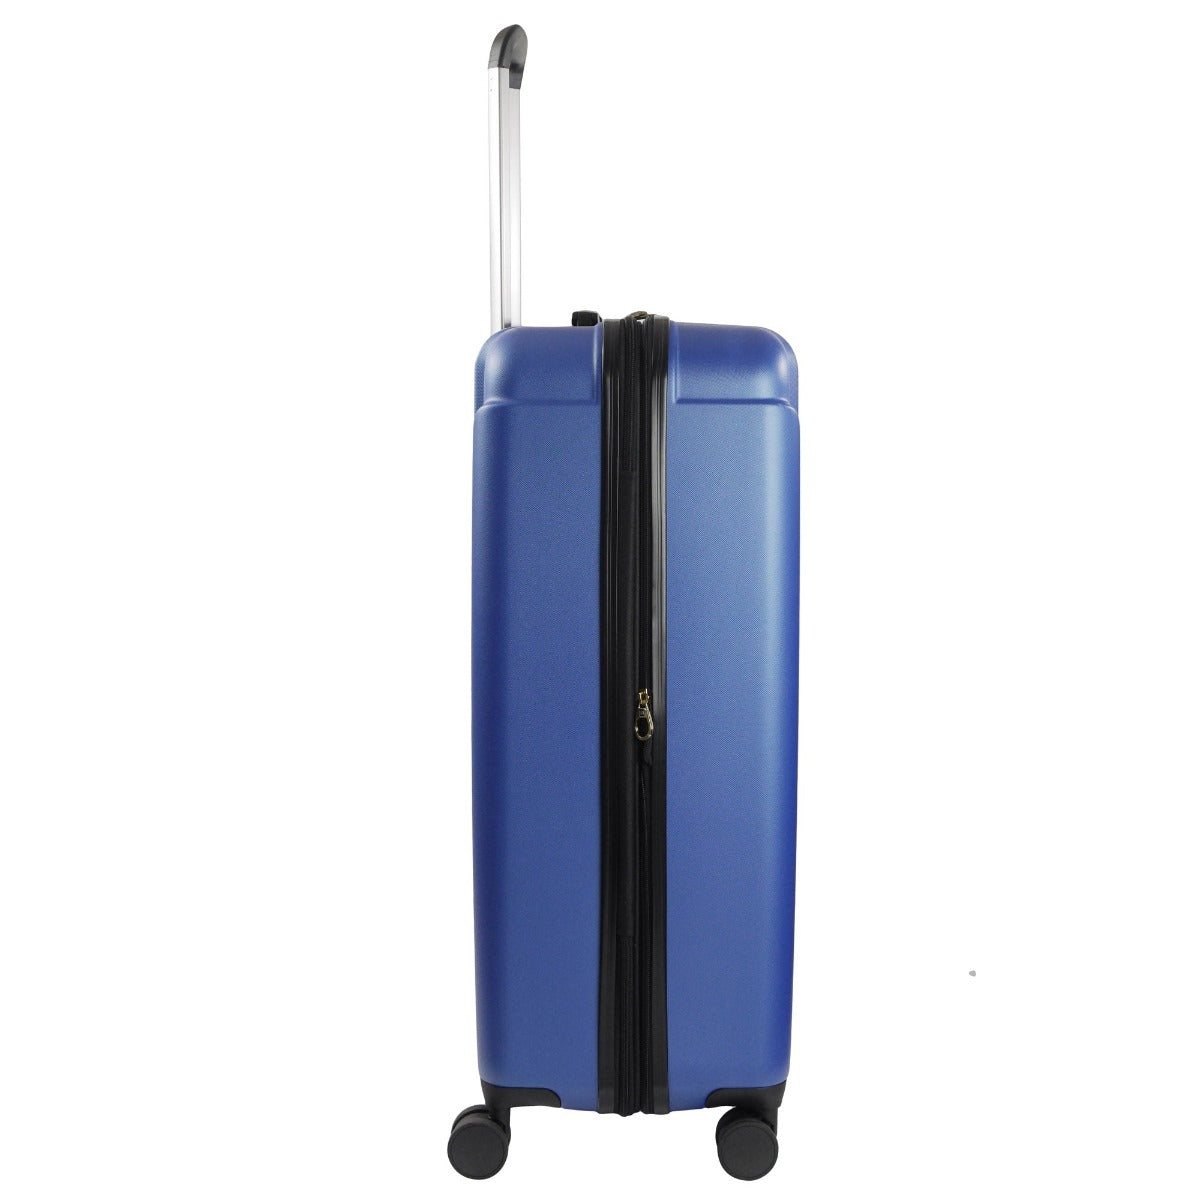 Load Rider 29-inch large check-in expandable Spinner Suitcase Rolling Luggage in Cobalt Blue by Ful